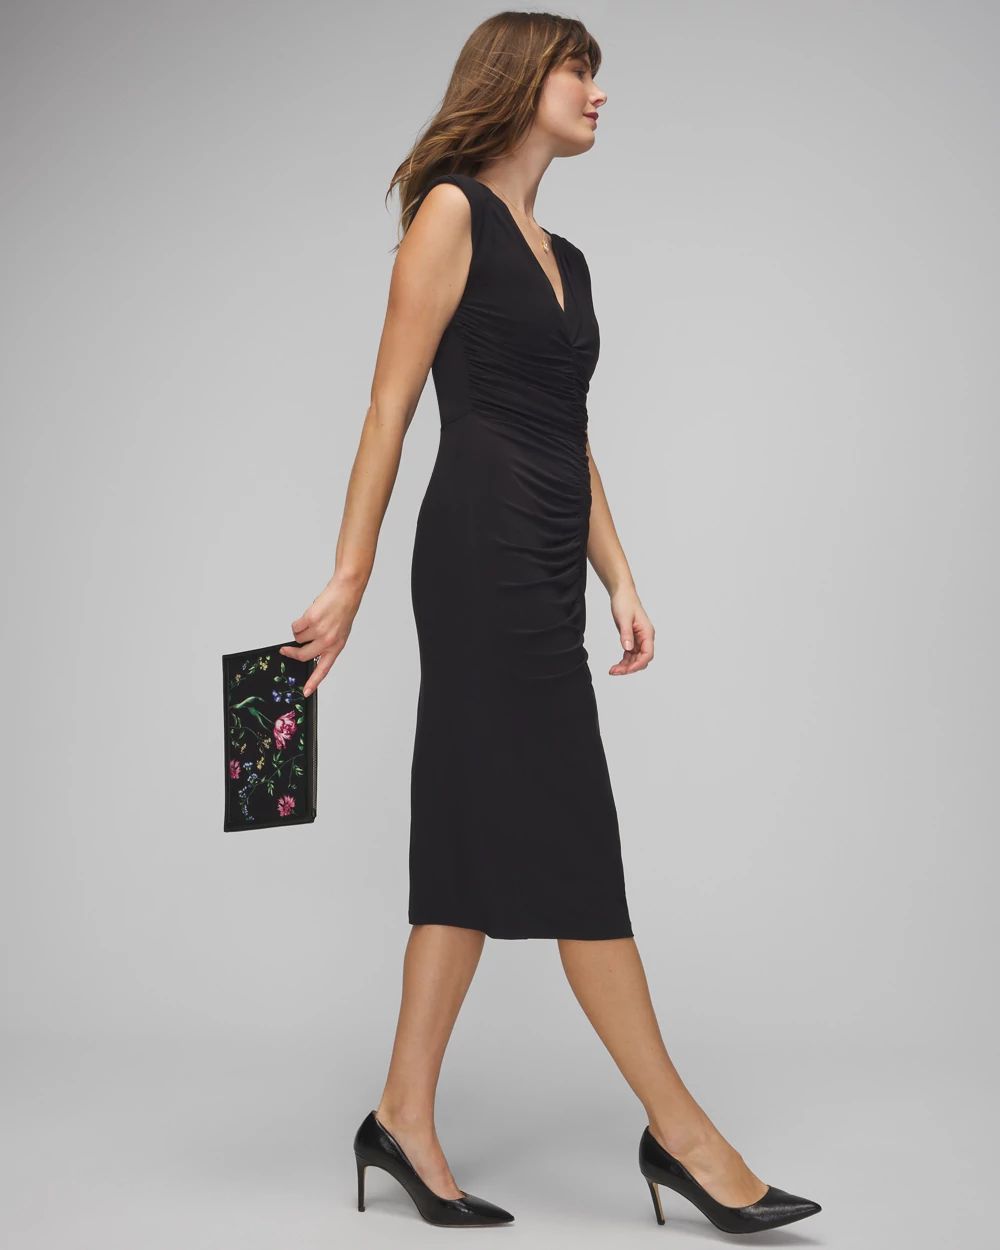 Petite Sleeveless Ruched Bodycon Midi Dress click to view larger image.